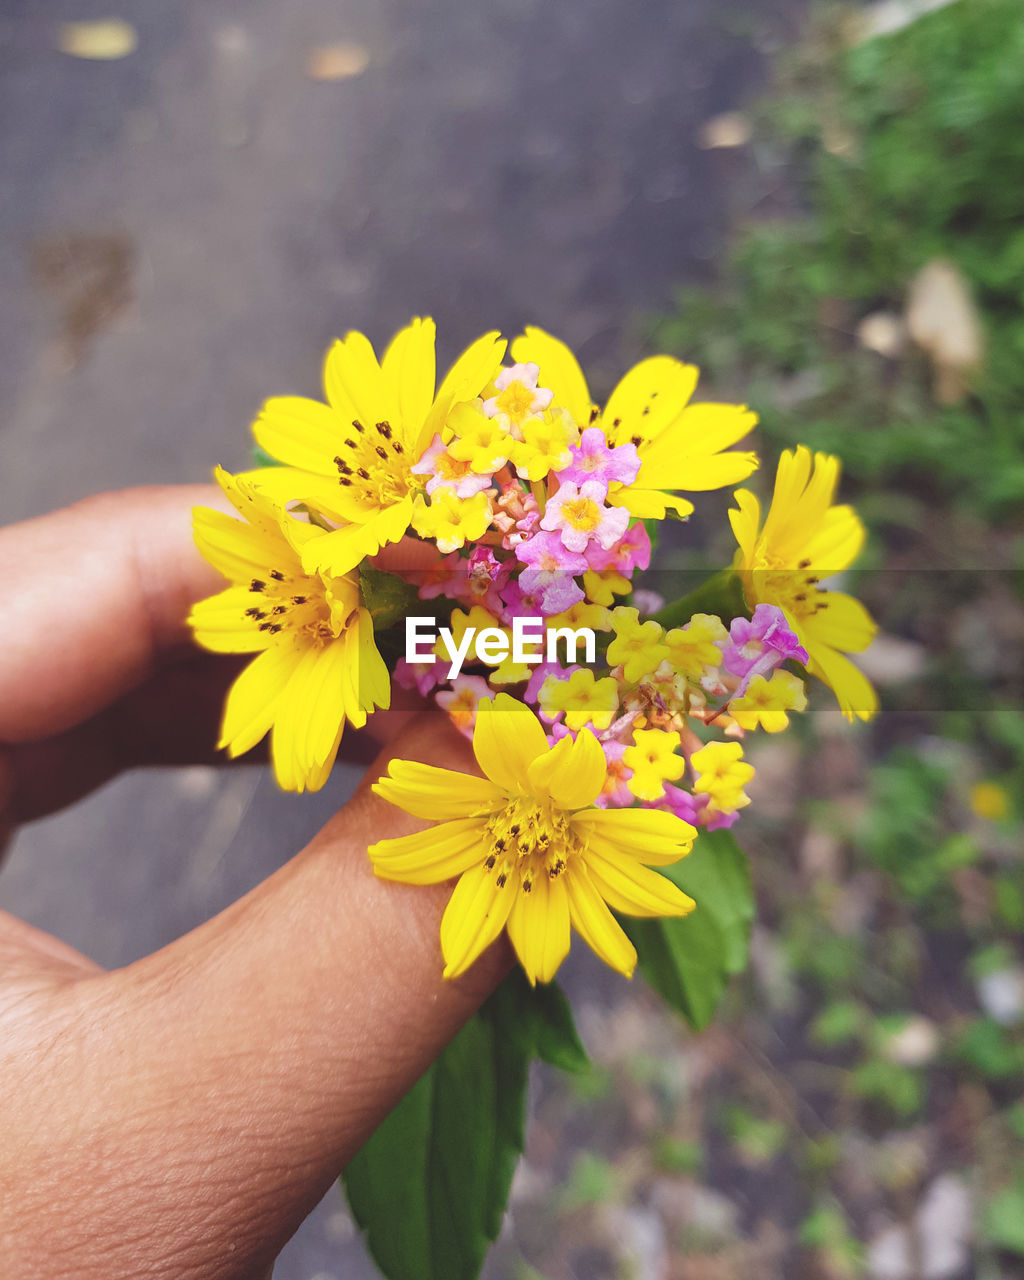 flower, flowering plant, yellow, hand, plant, freshness, one person, holding, fragility, beauty in nature, close-up, flower head, nature, personal perspective, focus on foreground, petal, inflorescence, day, outdoors, growth, women, macro photography, wildflower, adult, lifestyles, finger